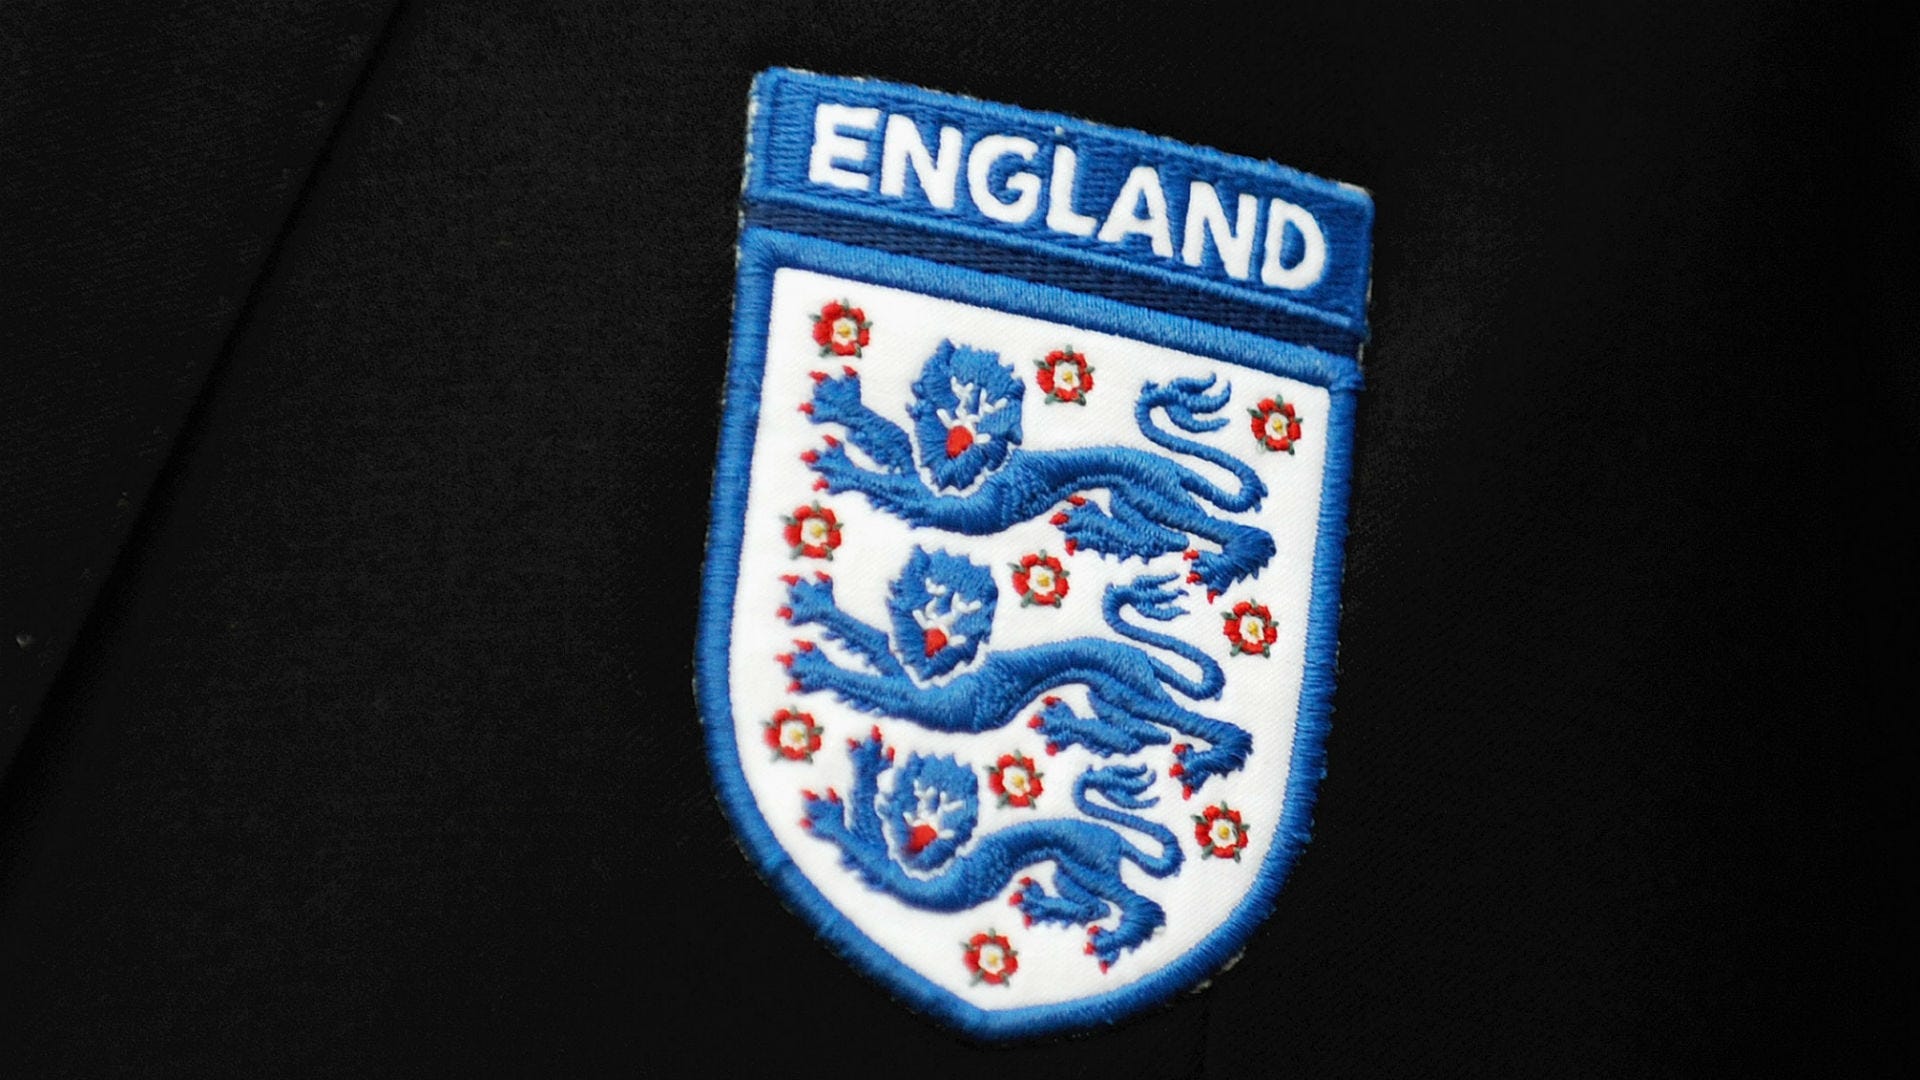 Goal Flag Football Dangly Earrings England Three Lions World Cup Jewellery New 